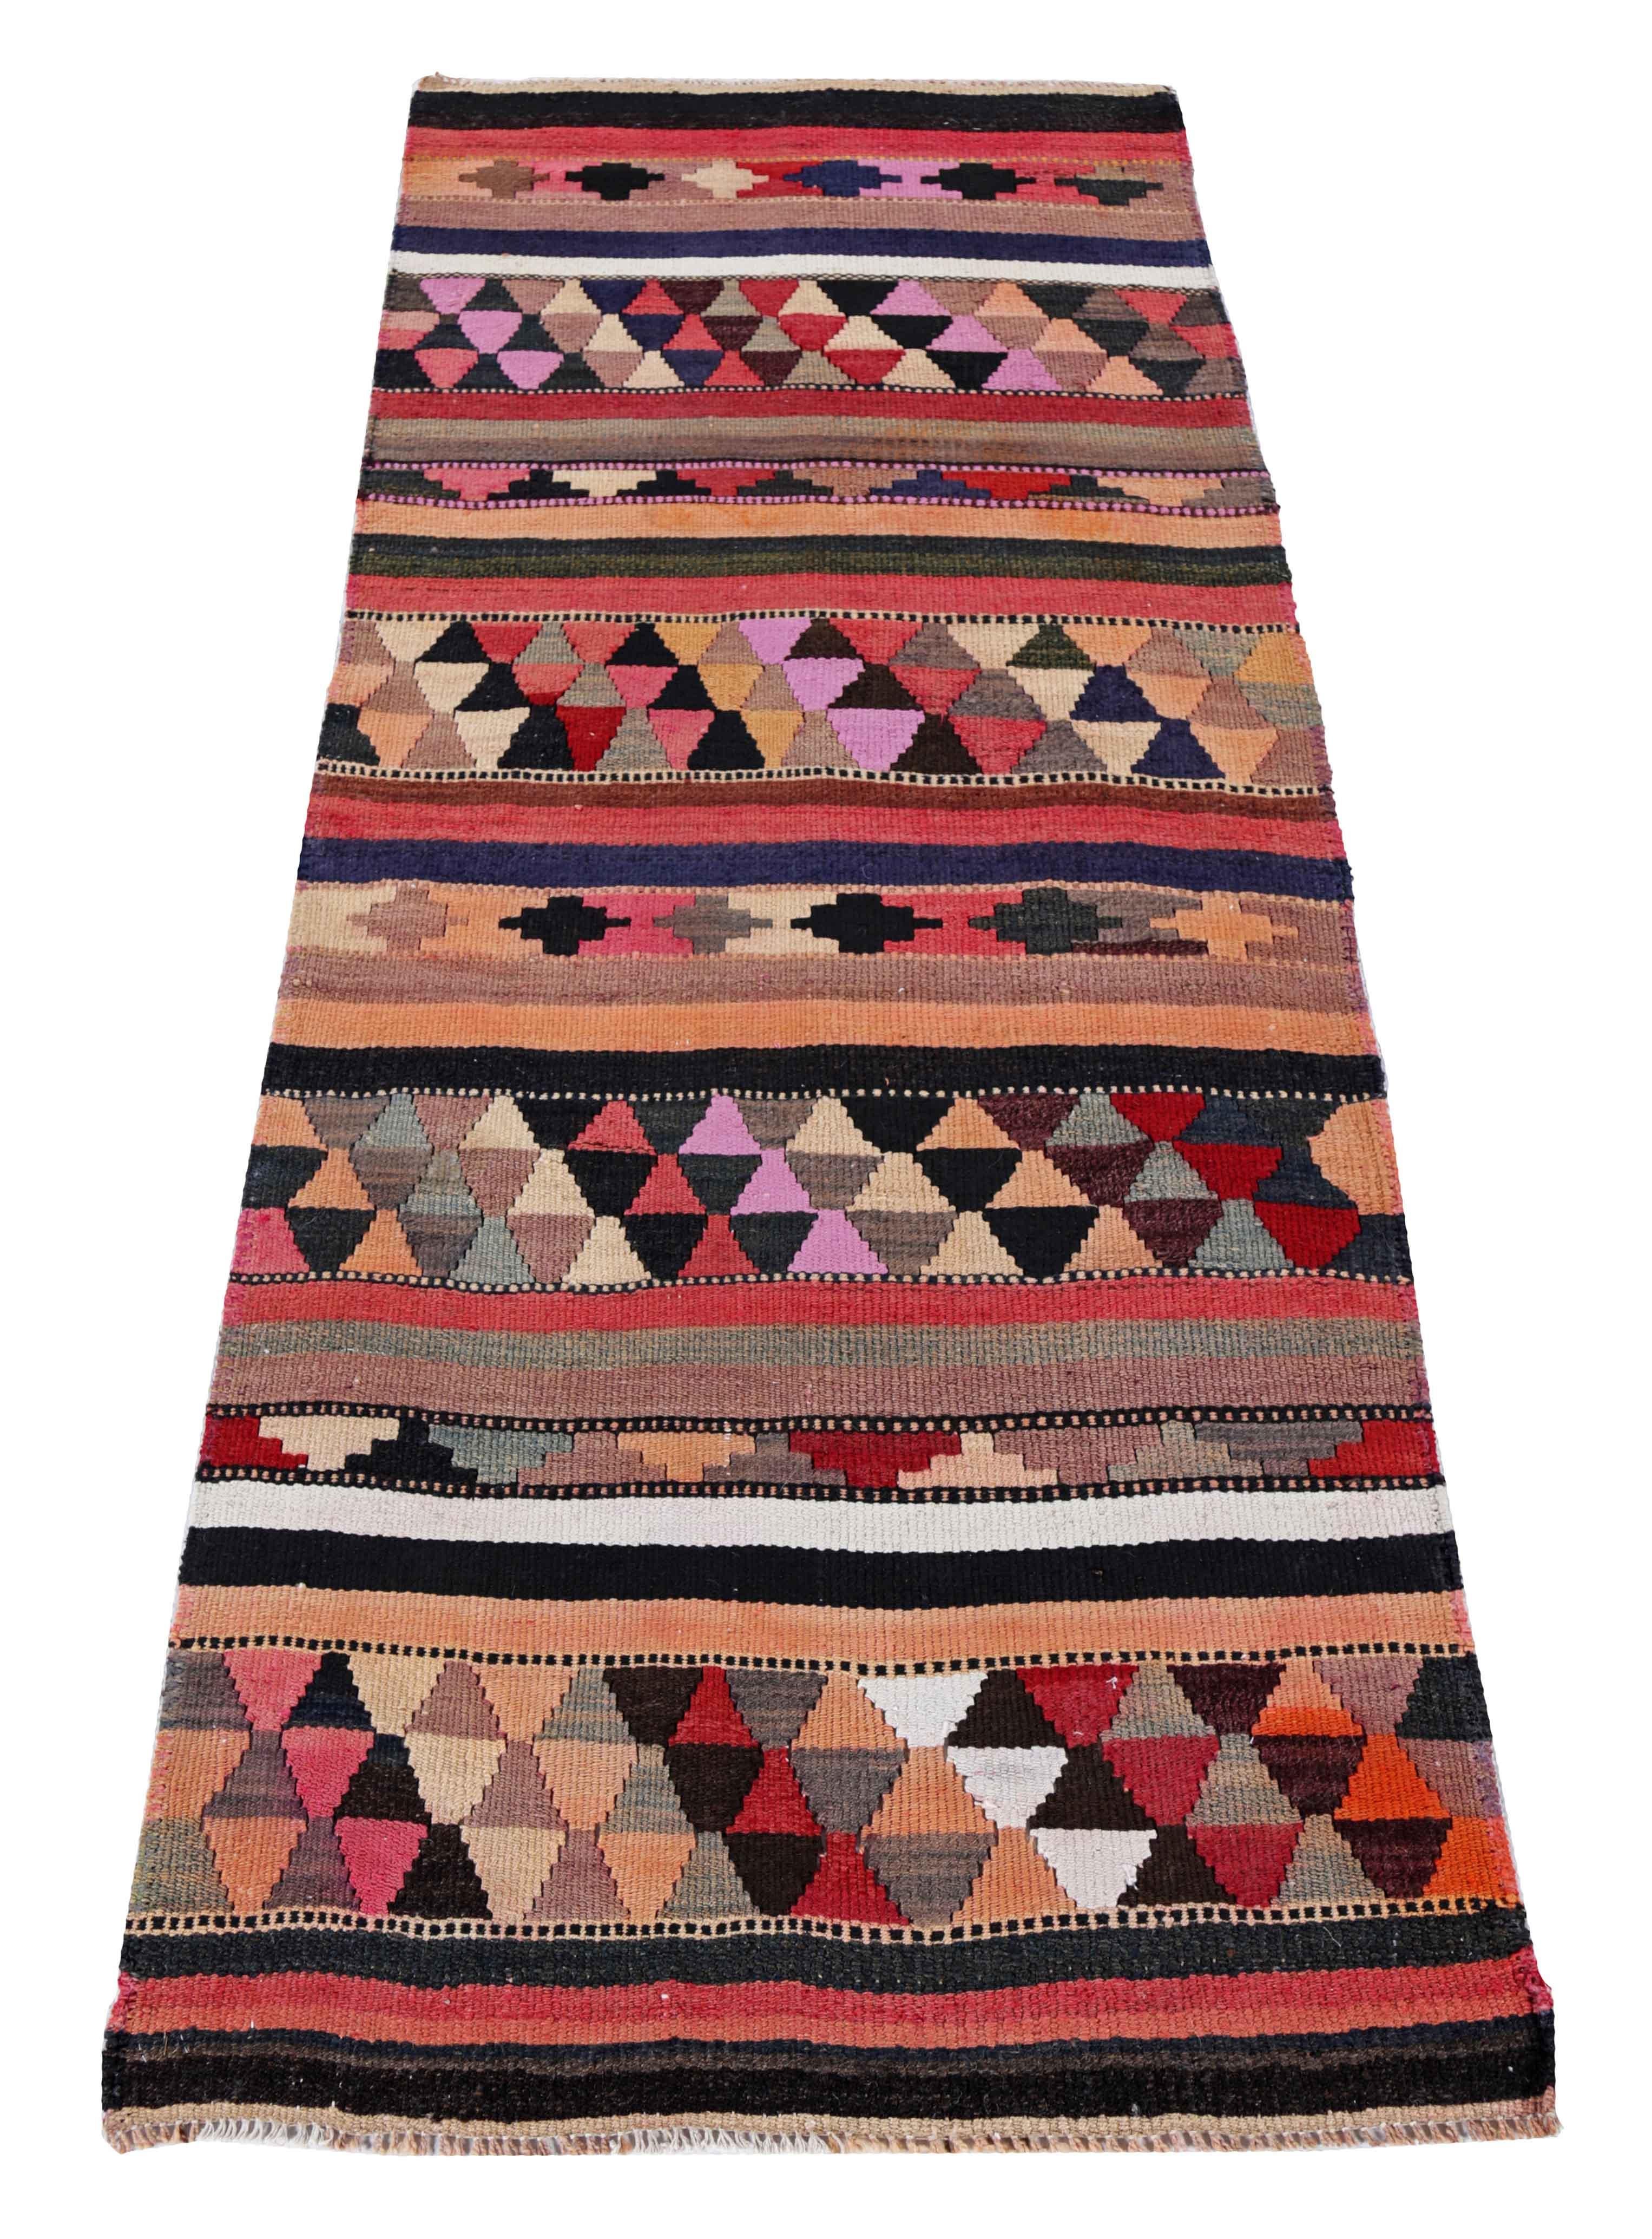 Antique Persian area rug handwoven from the finest sheep’s wool. It’s colored with all-natural vegetable dyes that are safe for humans and pets. It’s a traditional Kilim design handwoven by expert artisans. It’s a lovely area rug that can be